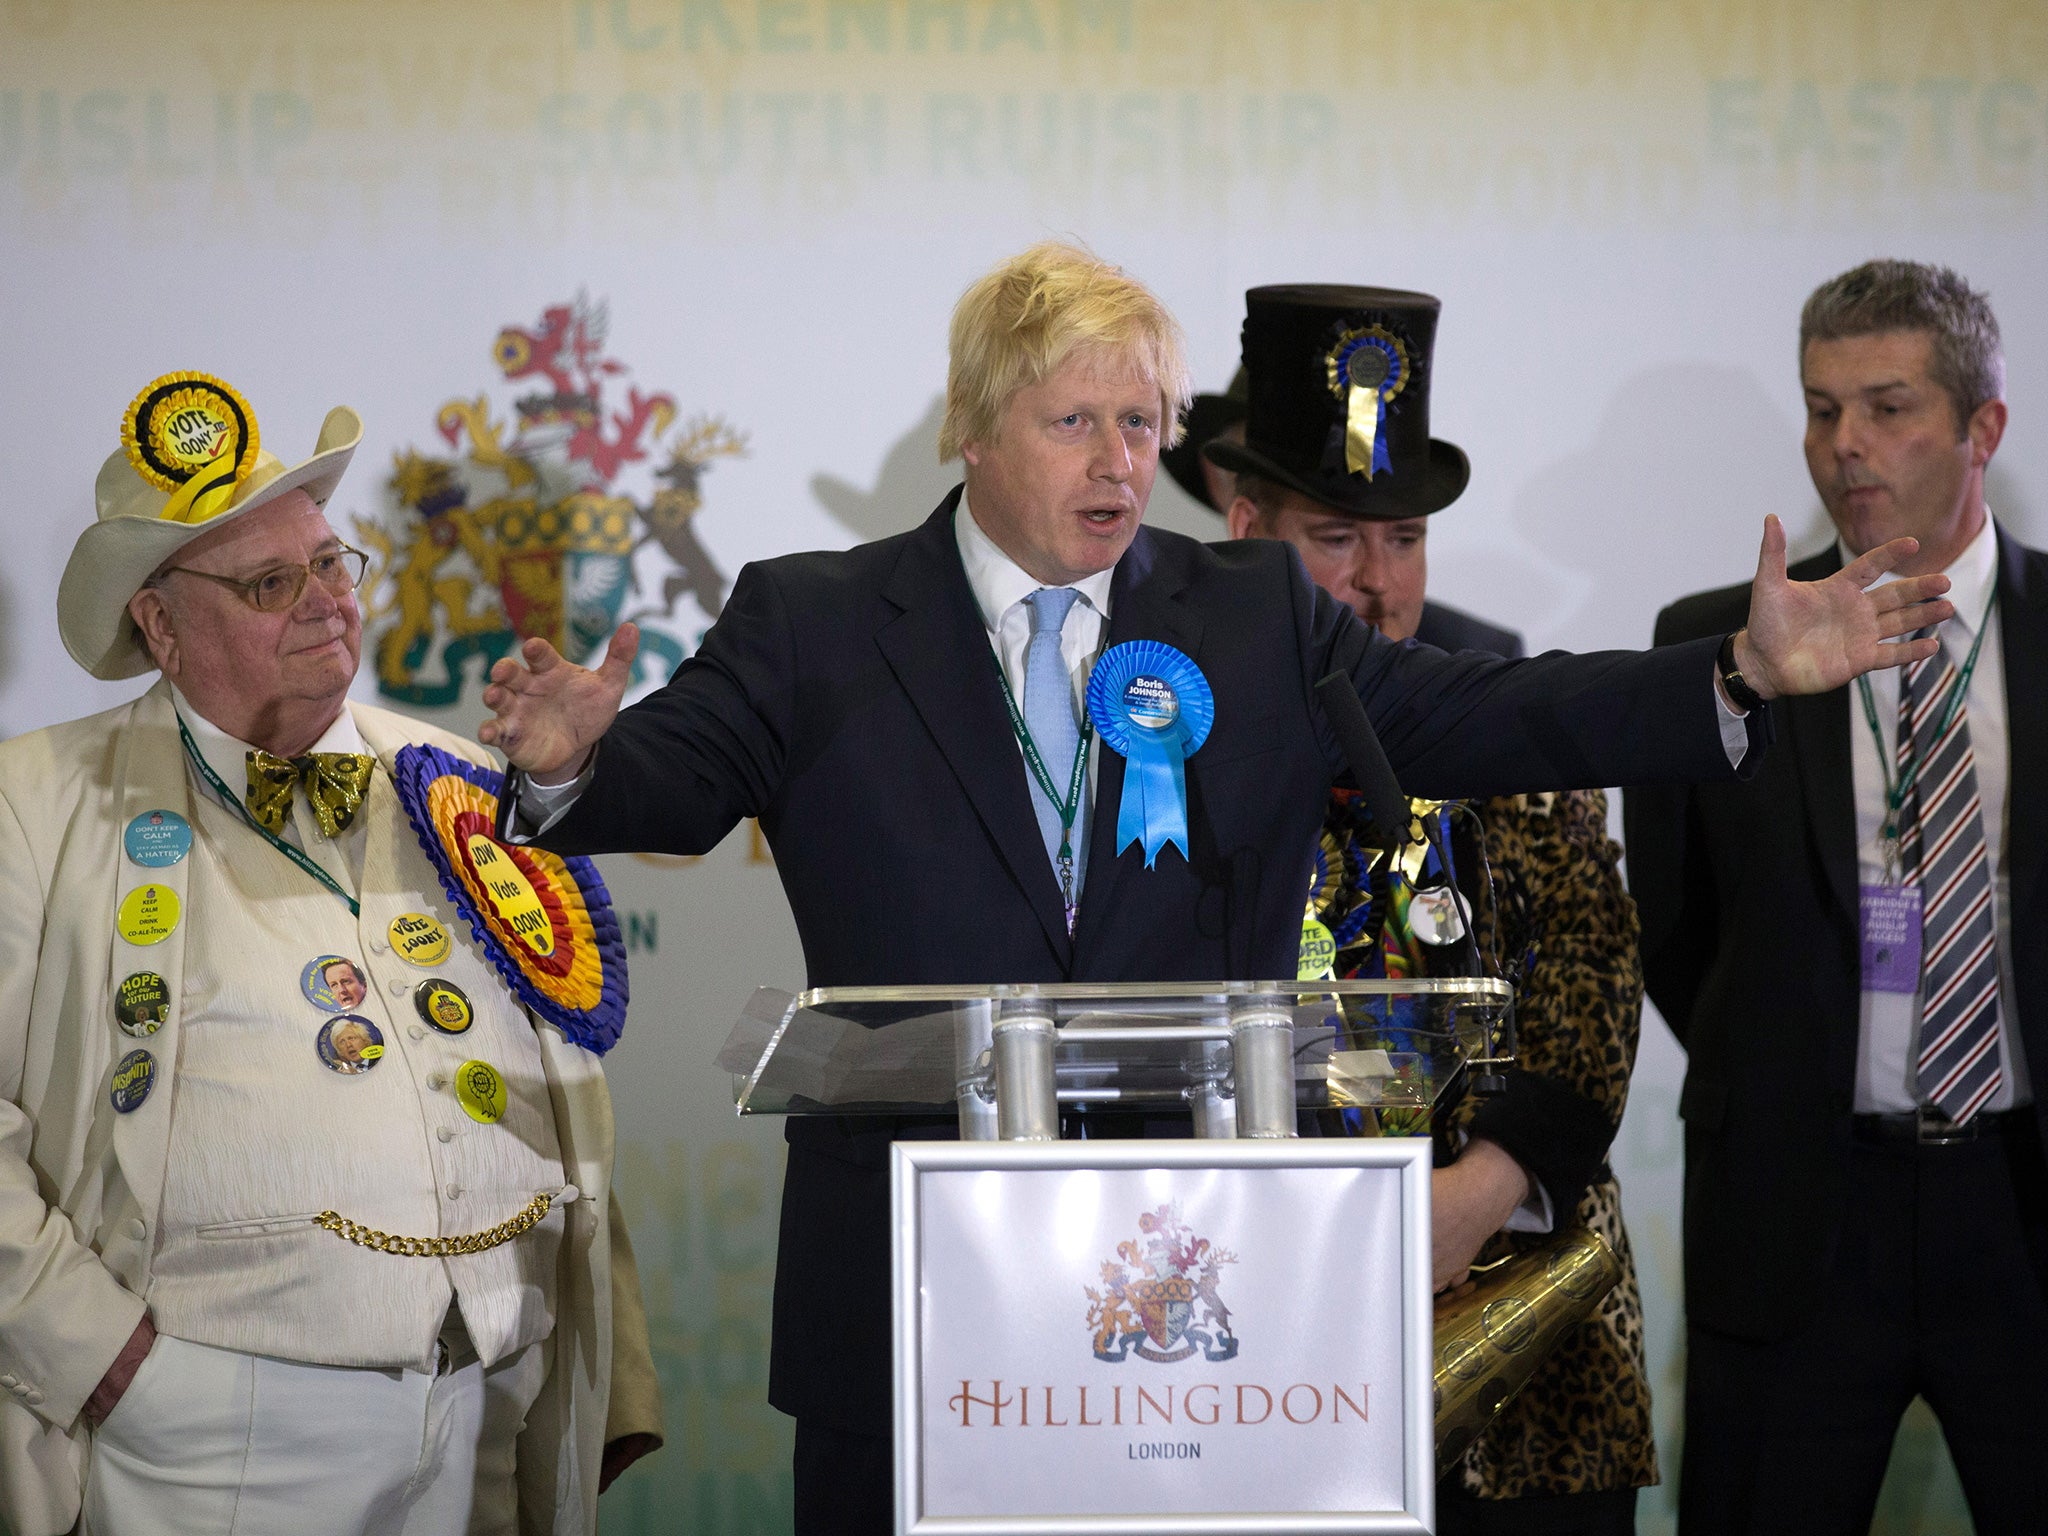 Boris Johnson, in his victory speech in Uxbridge, said outdated politics had been rejected